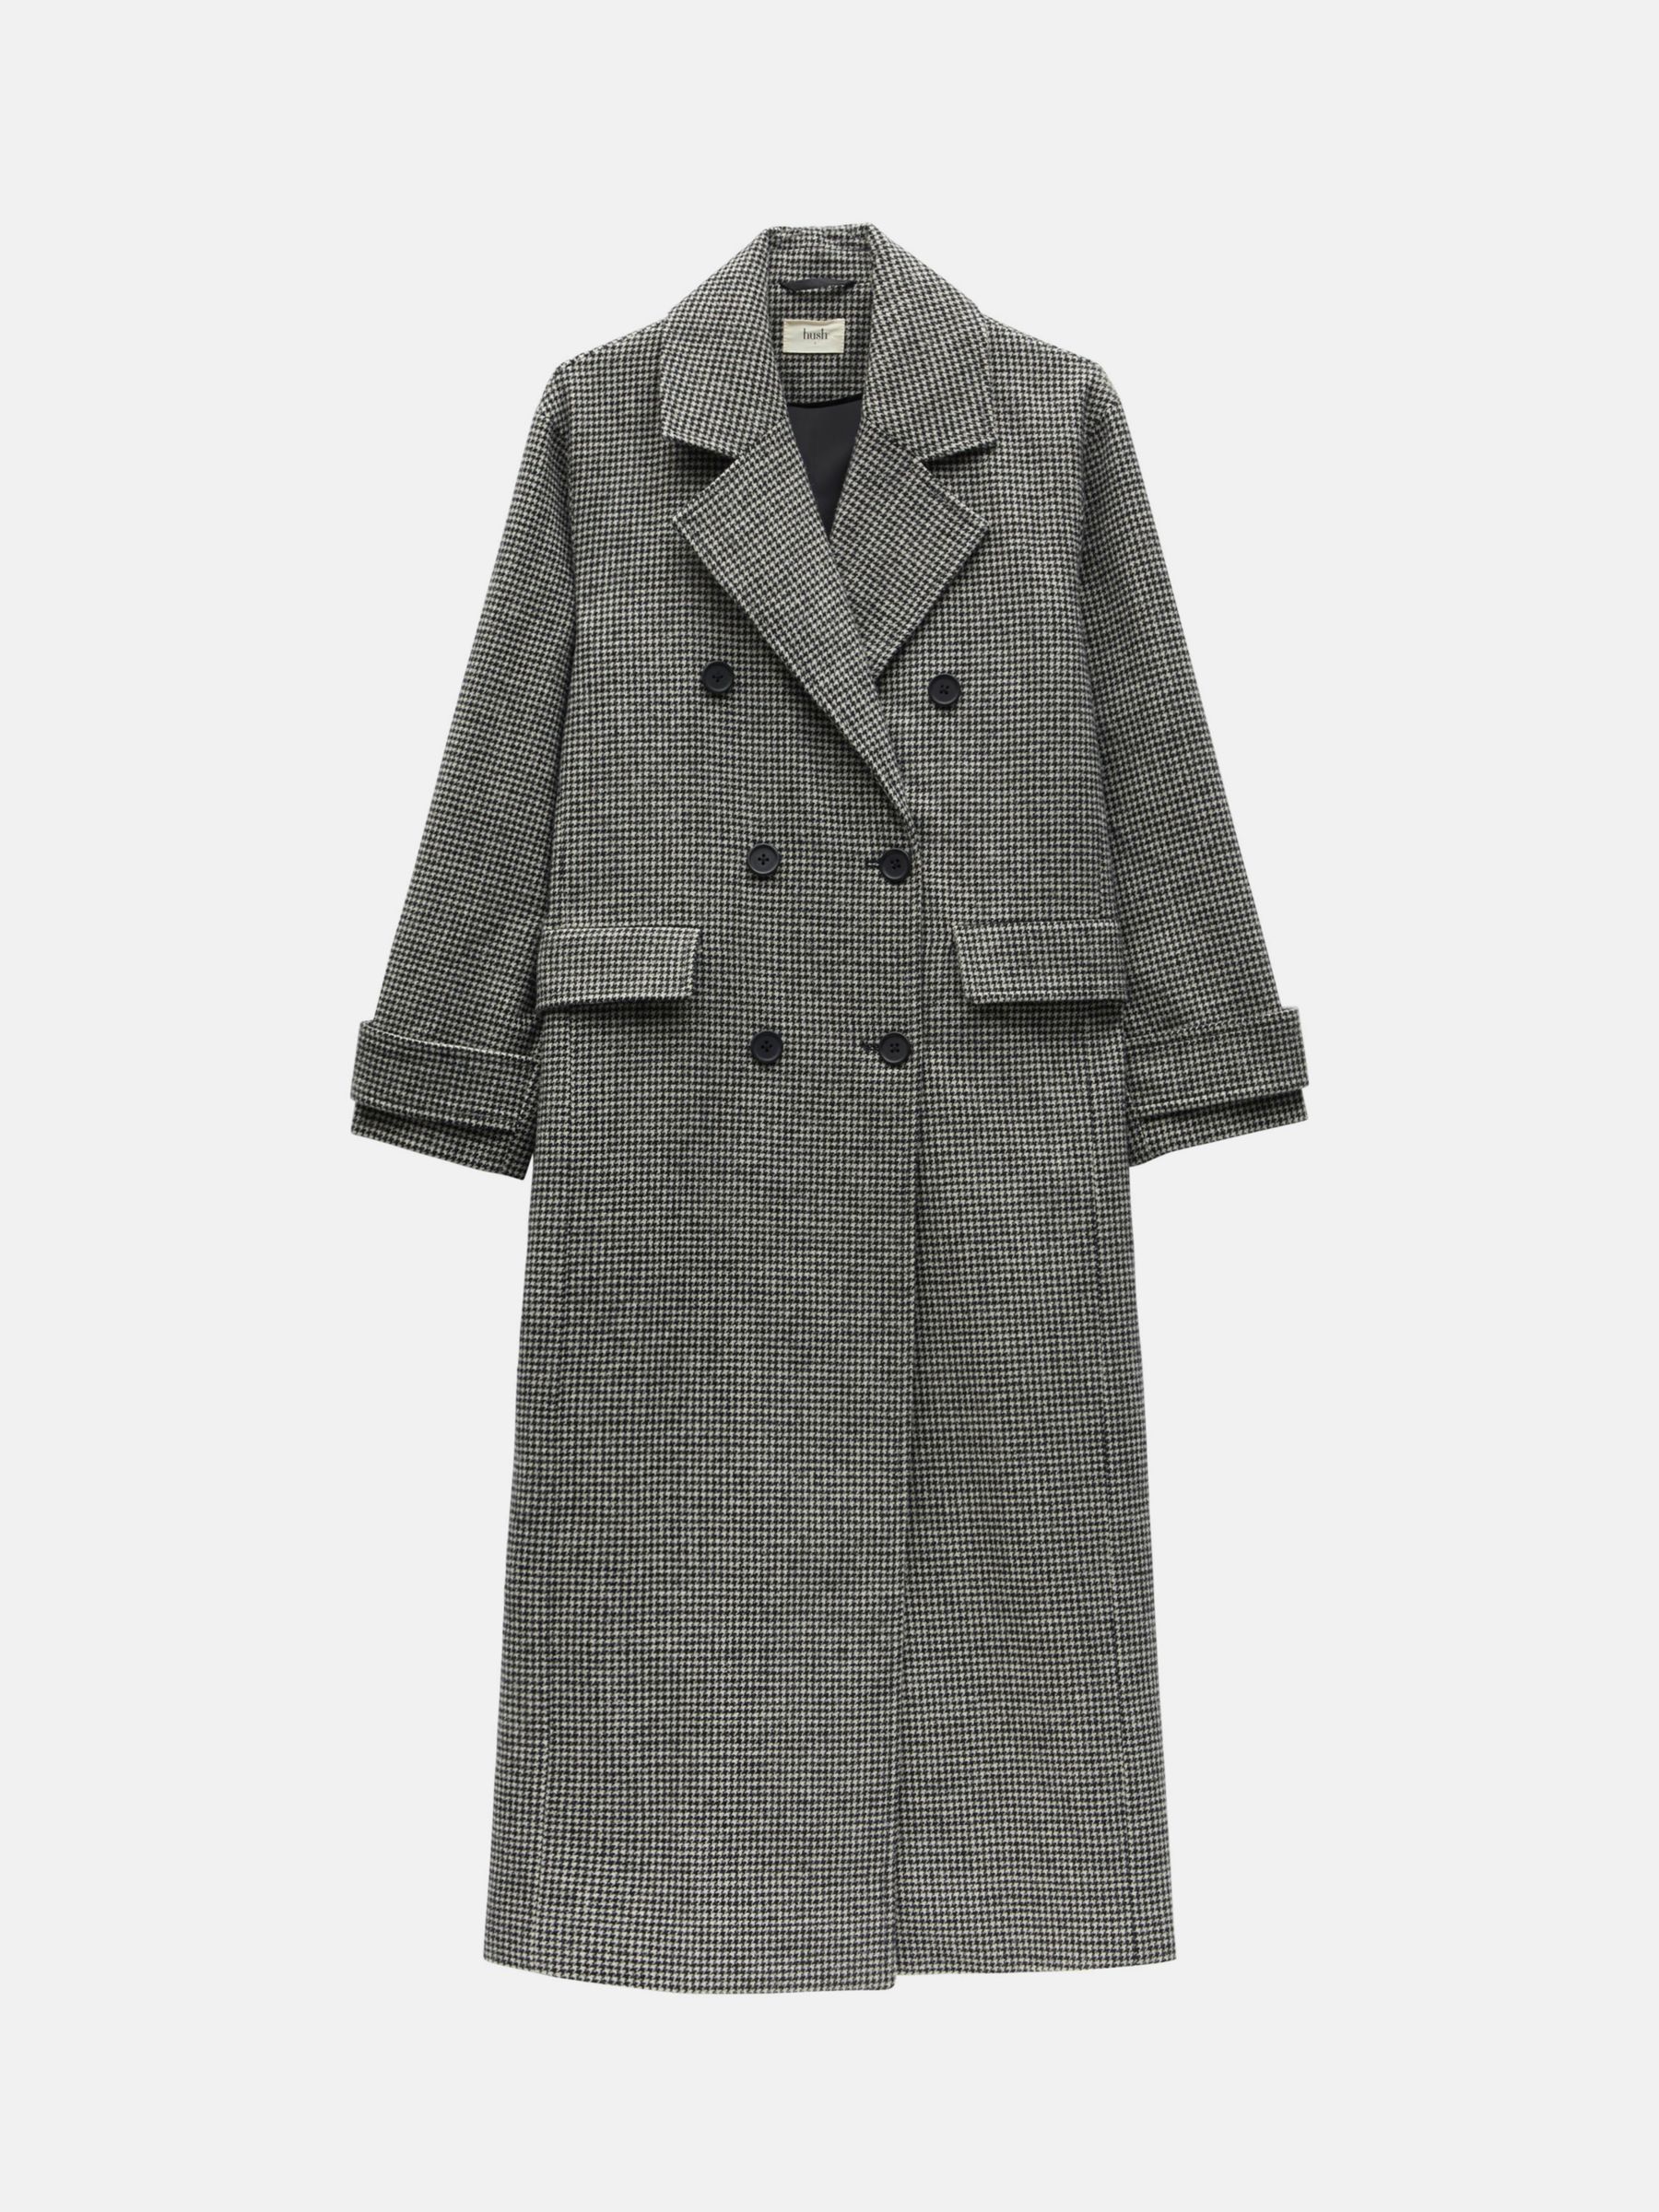 HUSH Rose Double Breasted Houndstooth Coat, Black/White at John Lewis ...